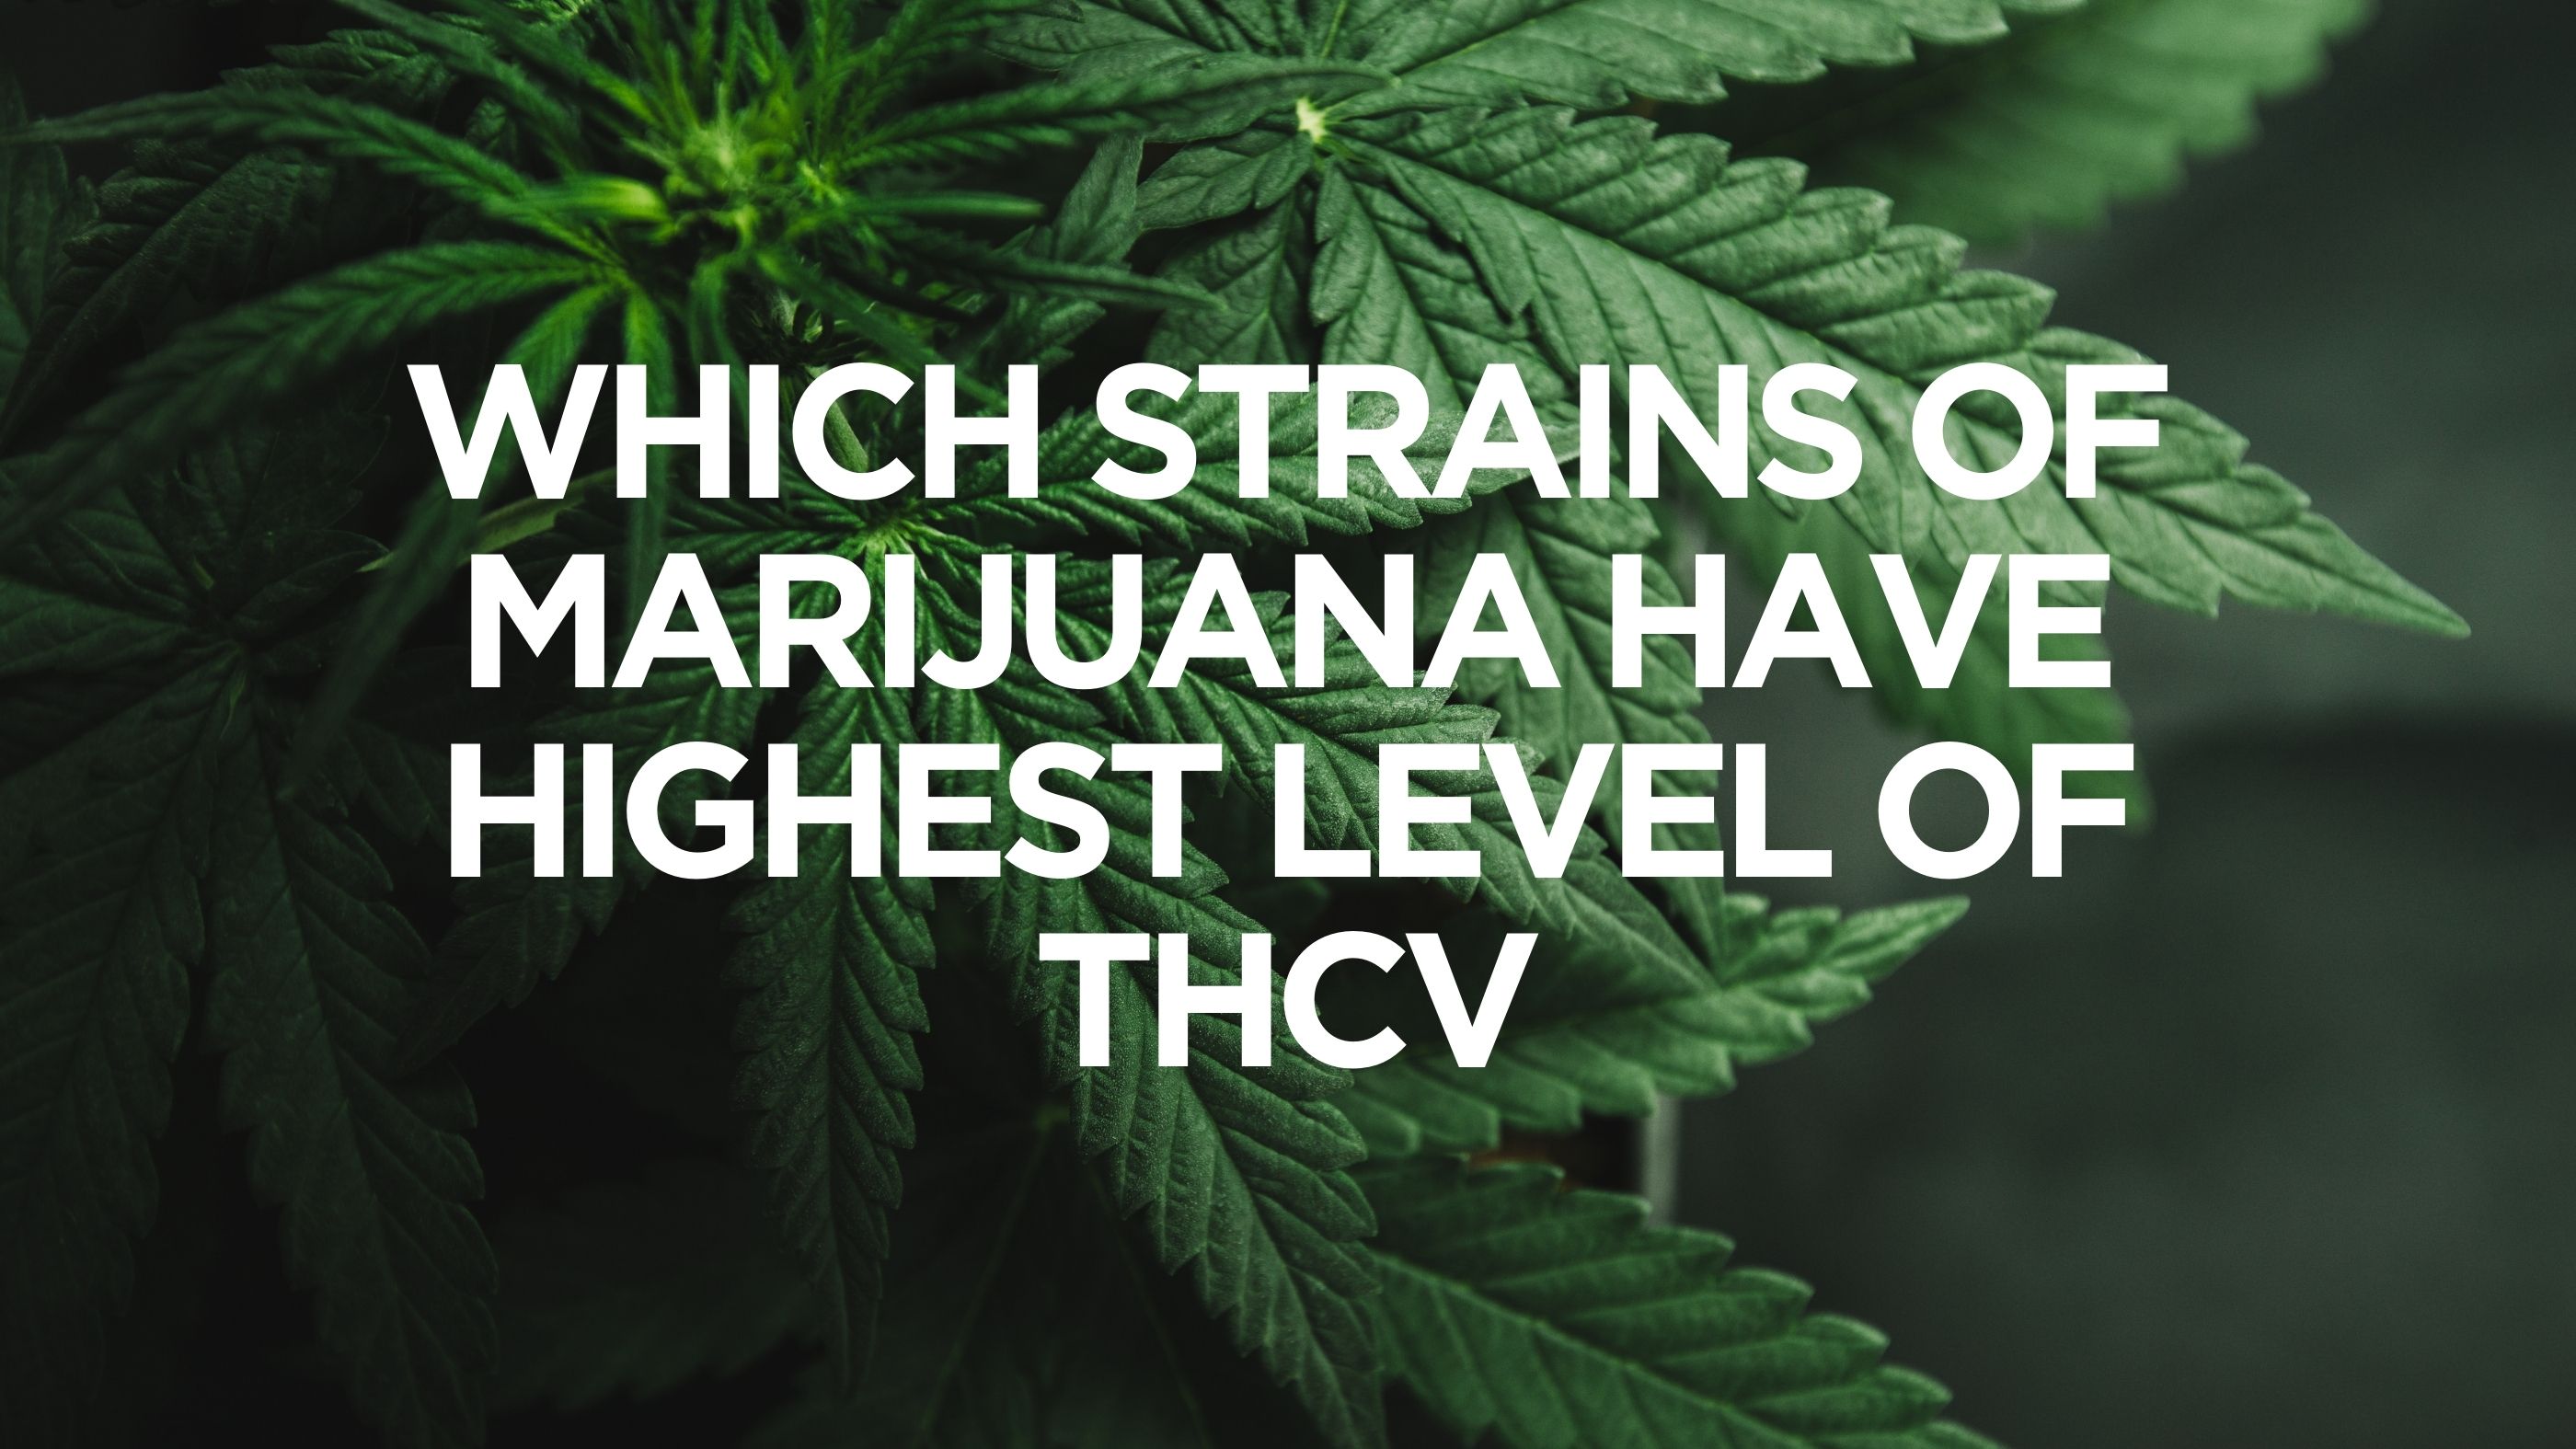 Which Strains of Marijuana Have Highest Level of THCV?